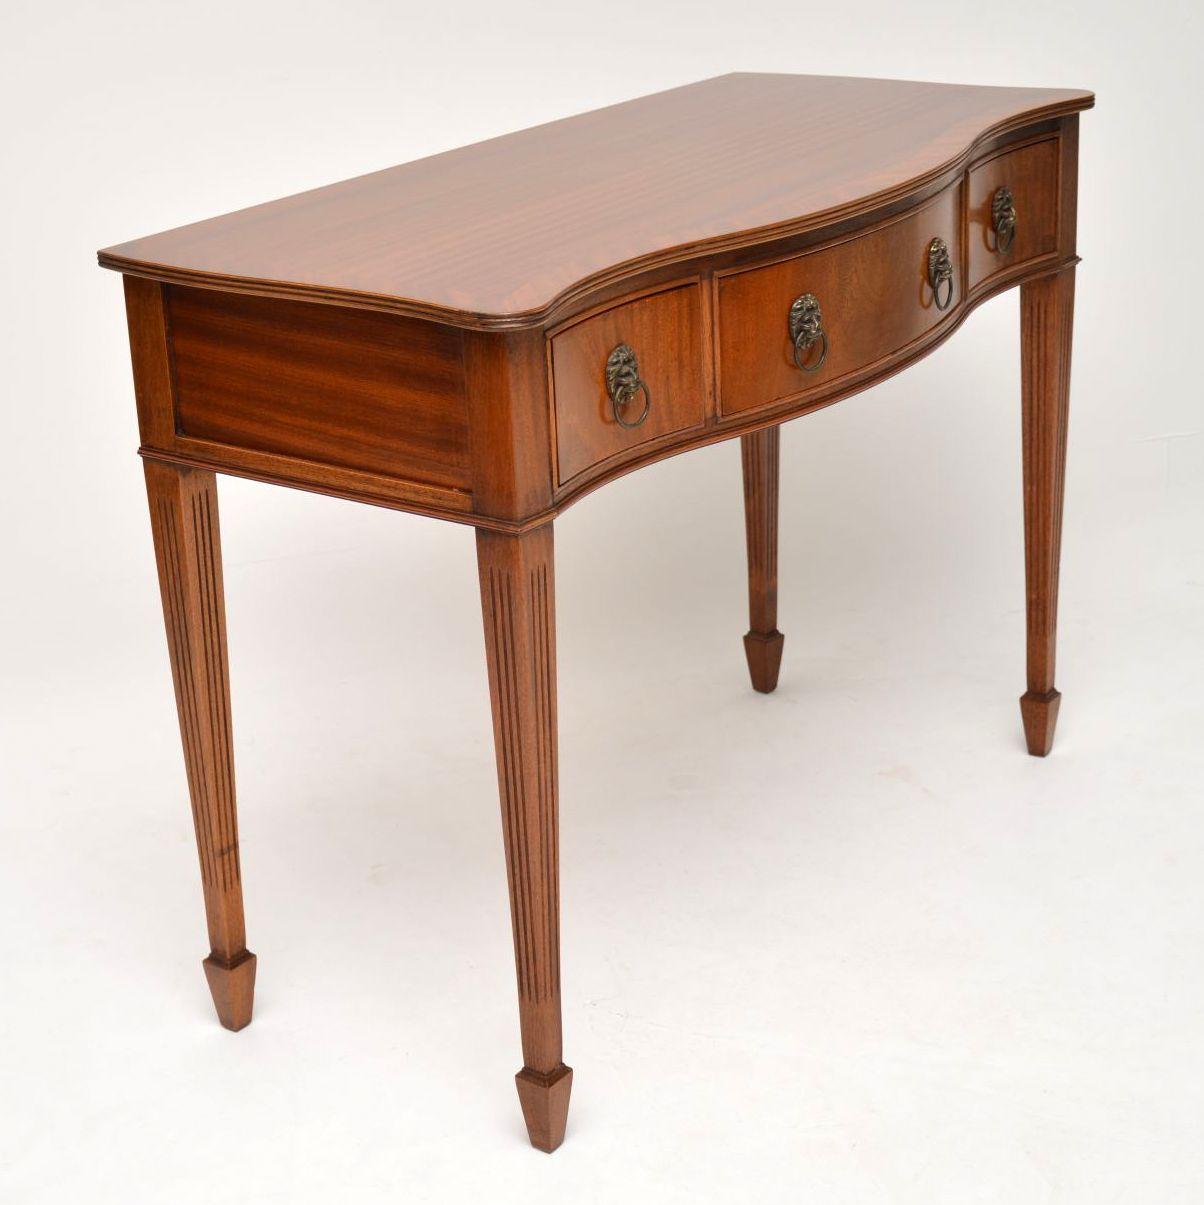 Mid-20th Century Antique Mahogany Serpentine Fronted Server Table